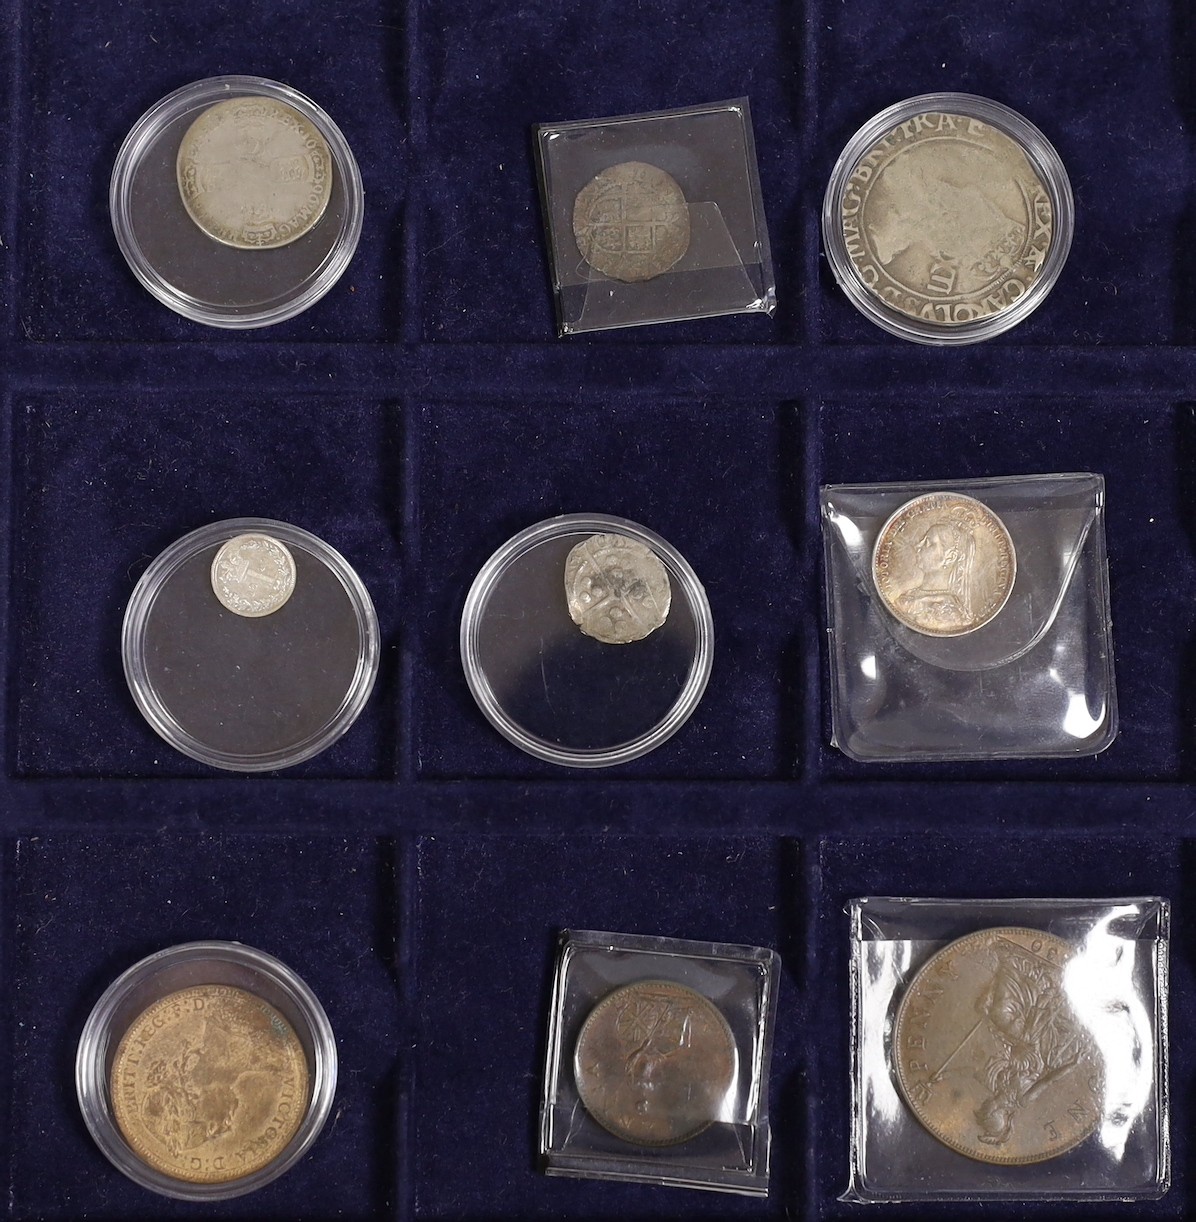 George V penny 1930, UNC, Victoria halfpenny 1887, lustrous UNC, George III farthing 1806, about EF, George IV silver 1d, UNC, Charles I shilling, Elizabeth I threepence, William III sixpence 1696 and other coins (10)   